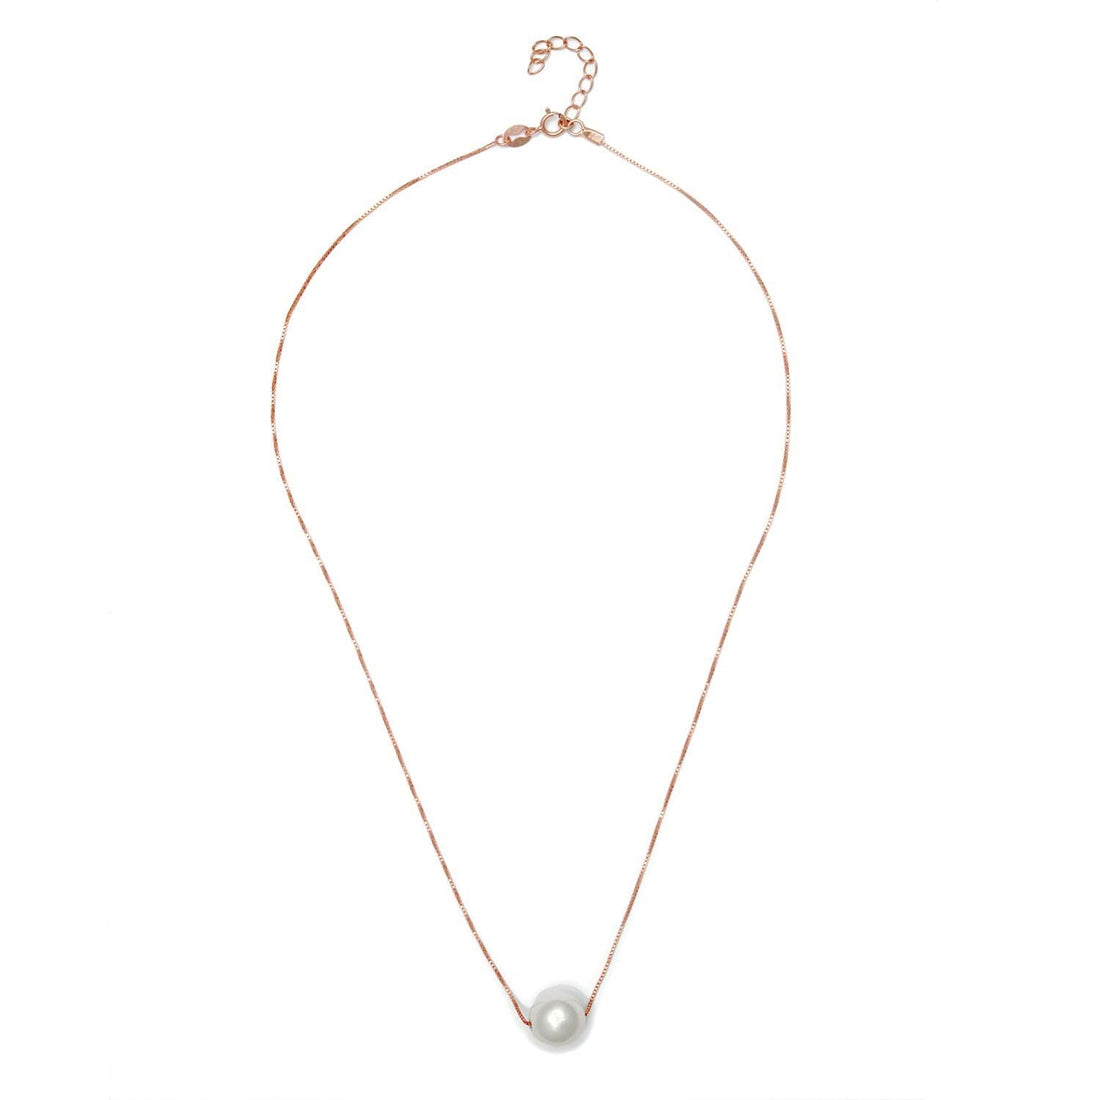 Freshwater Pearl 925 Silver Jewellery Set Trio with Rose Gold Chain